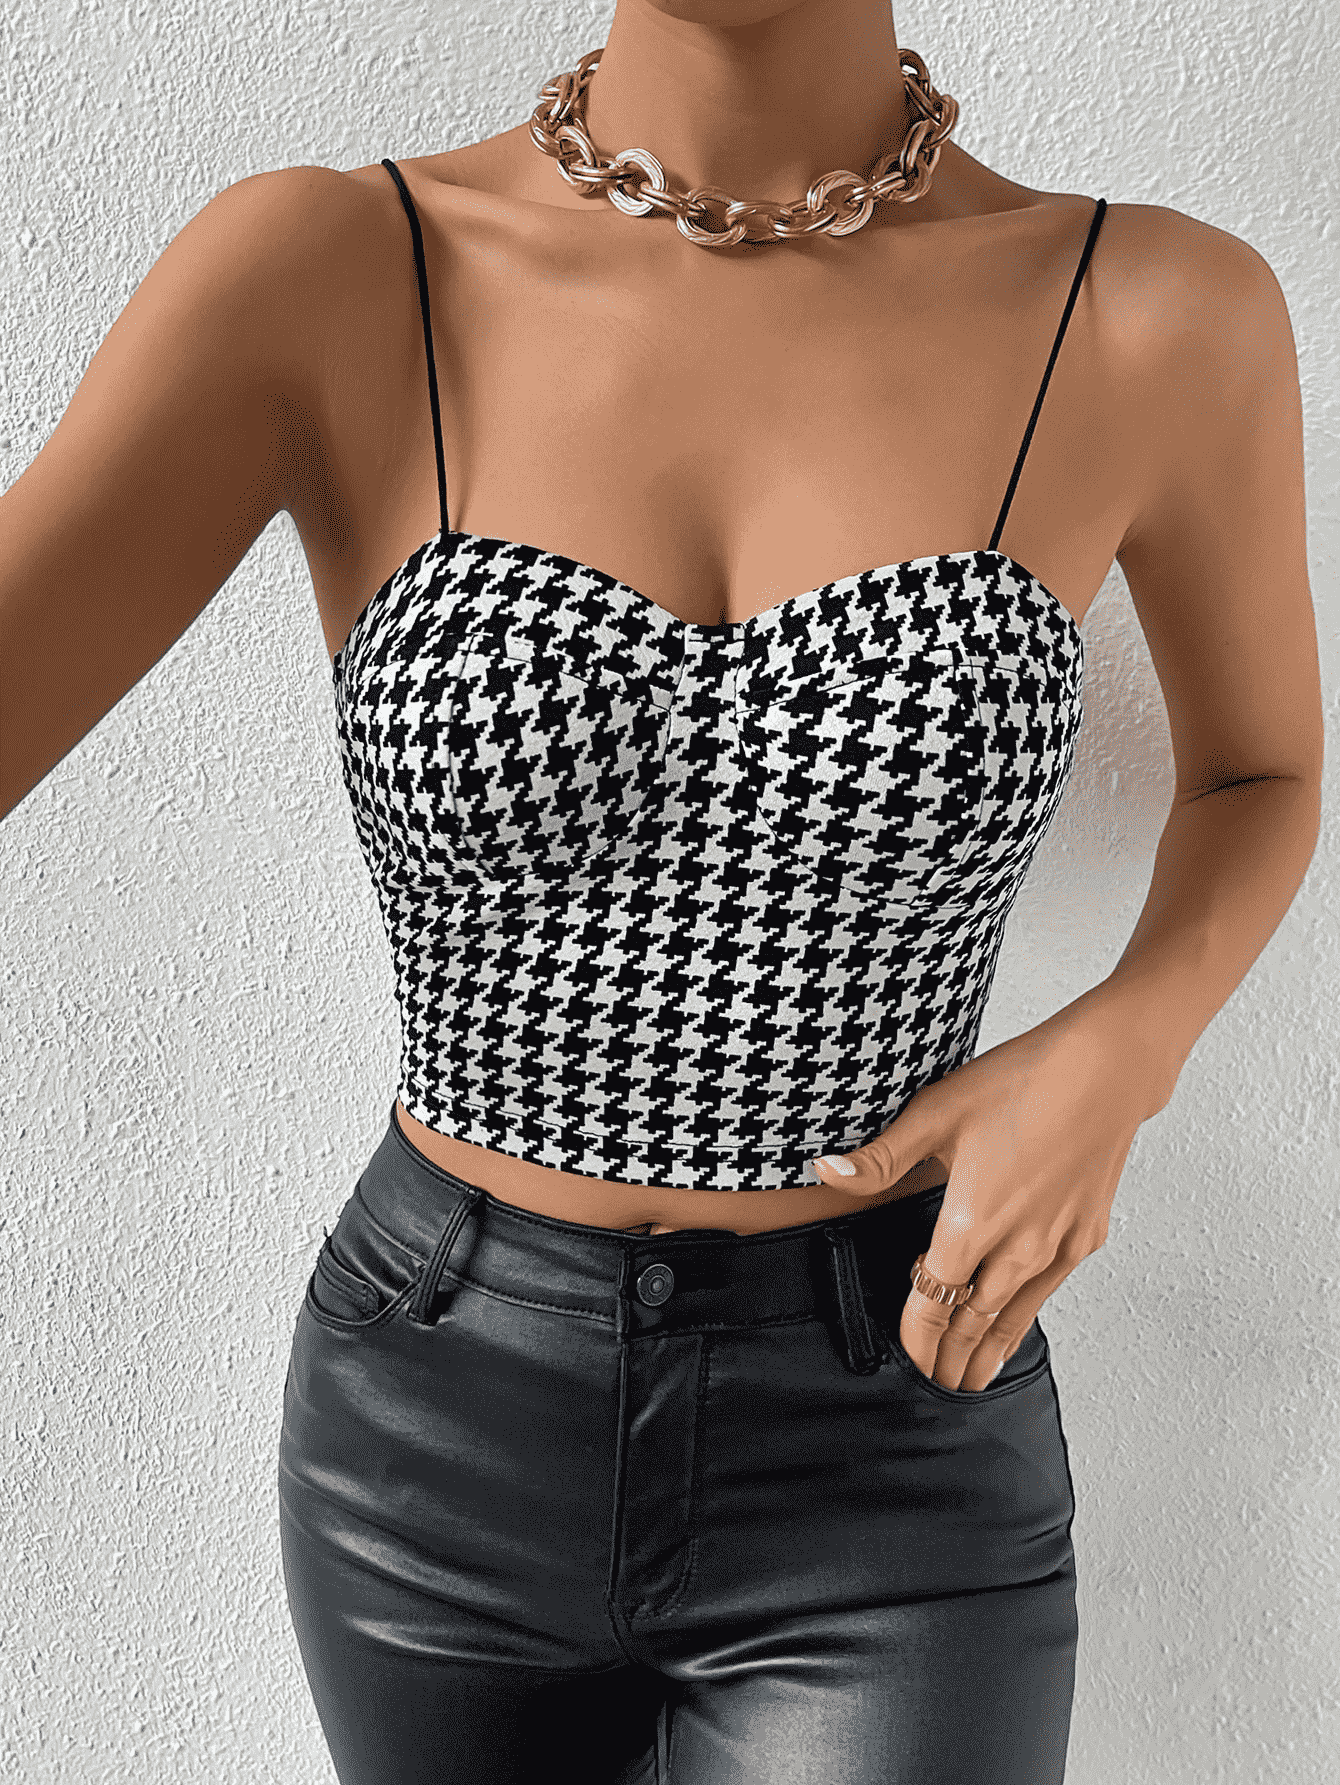 Cropped Sweetheart Neck Houndstooth Pattern Cami - Lab Fashion, Home & Health